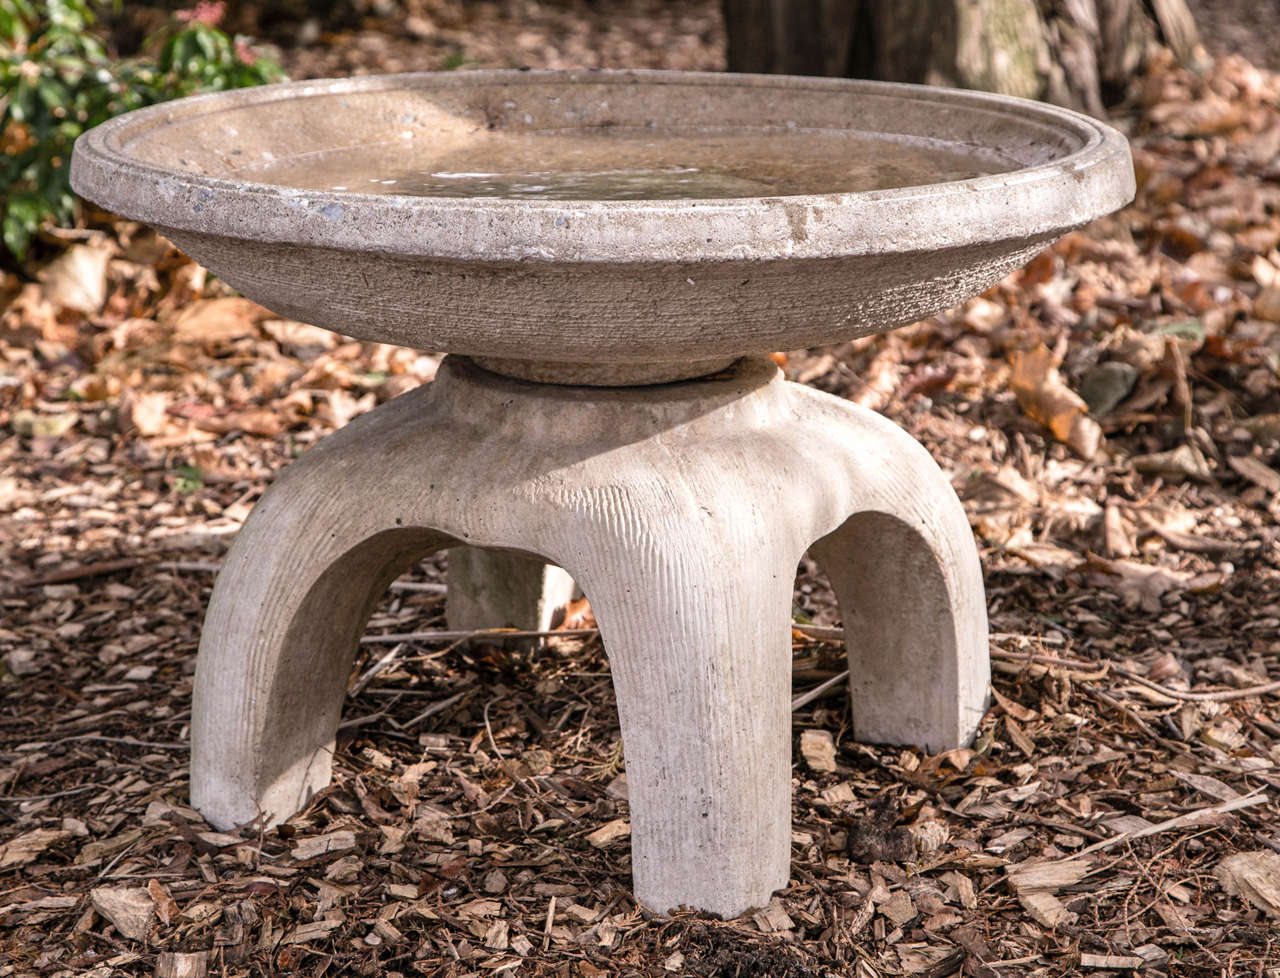 A composition stone birdbath in the Japanese style, comprised of a simple wide bowl on four-legged base.